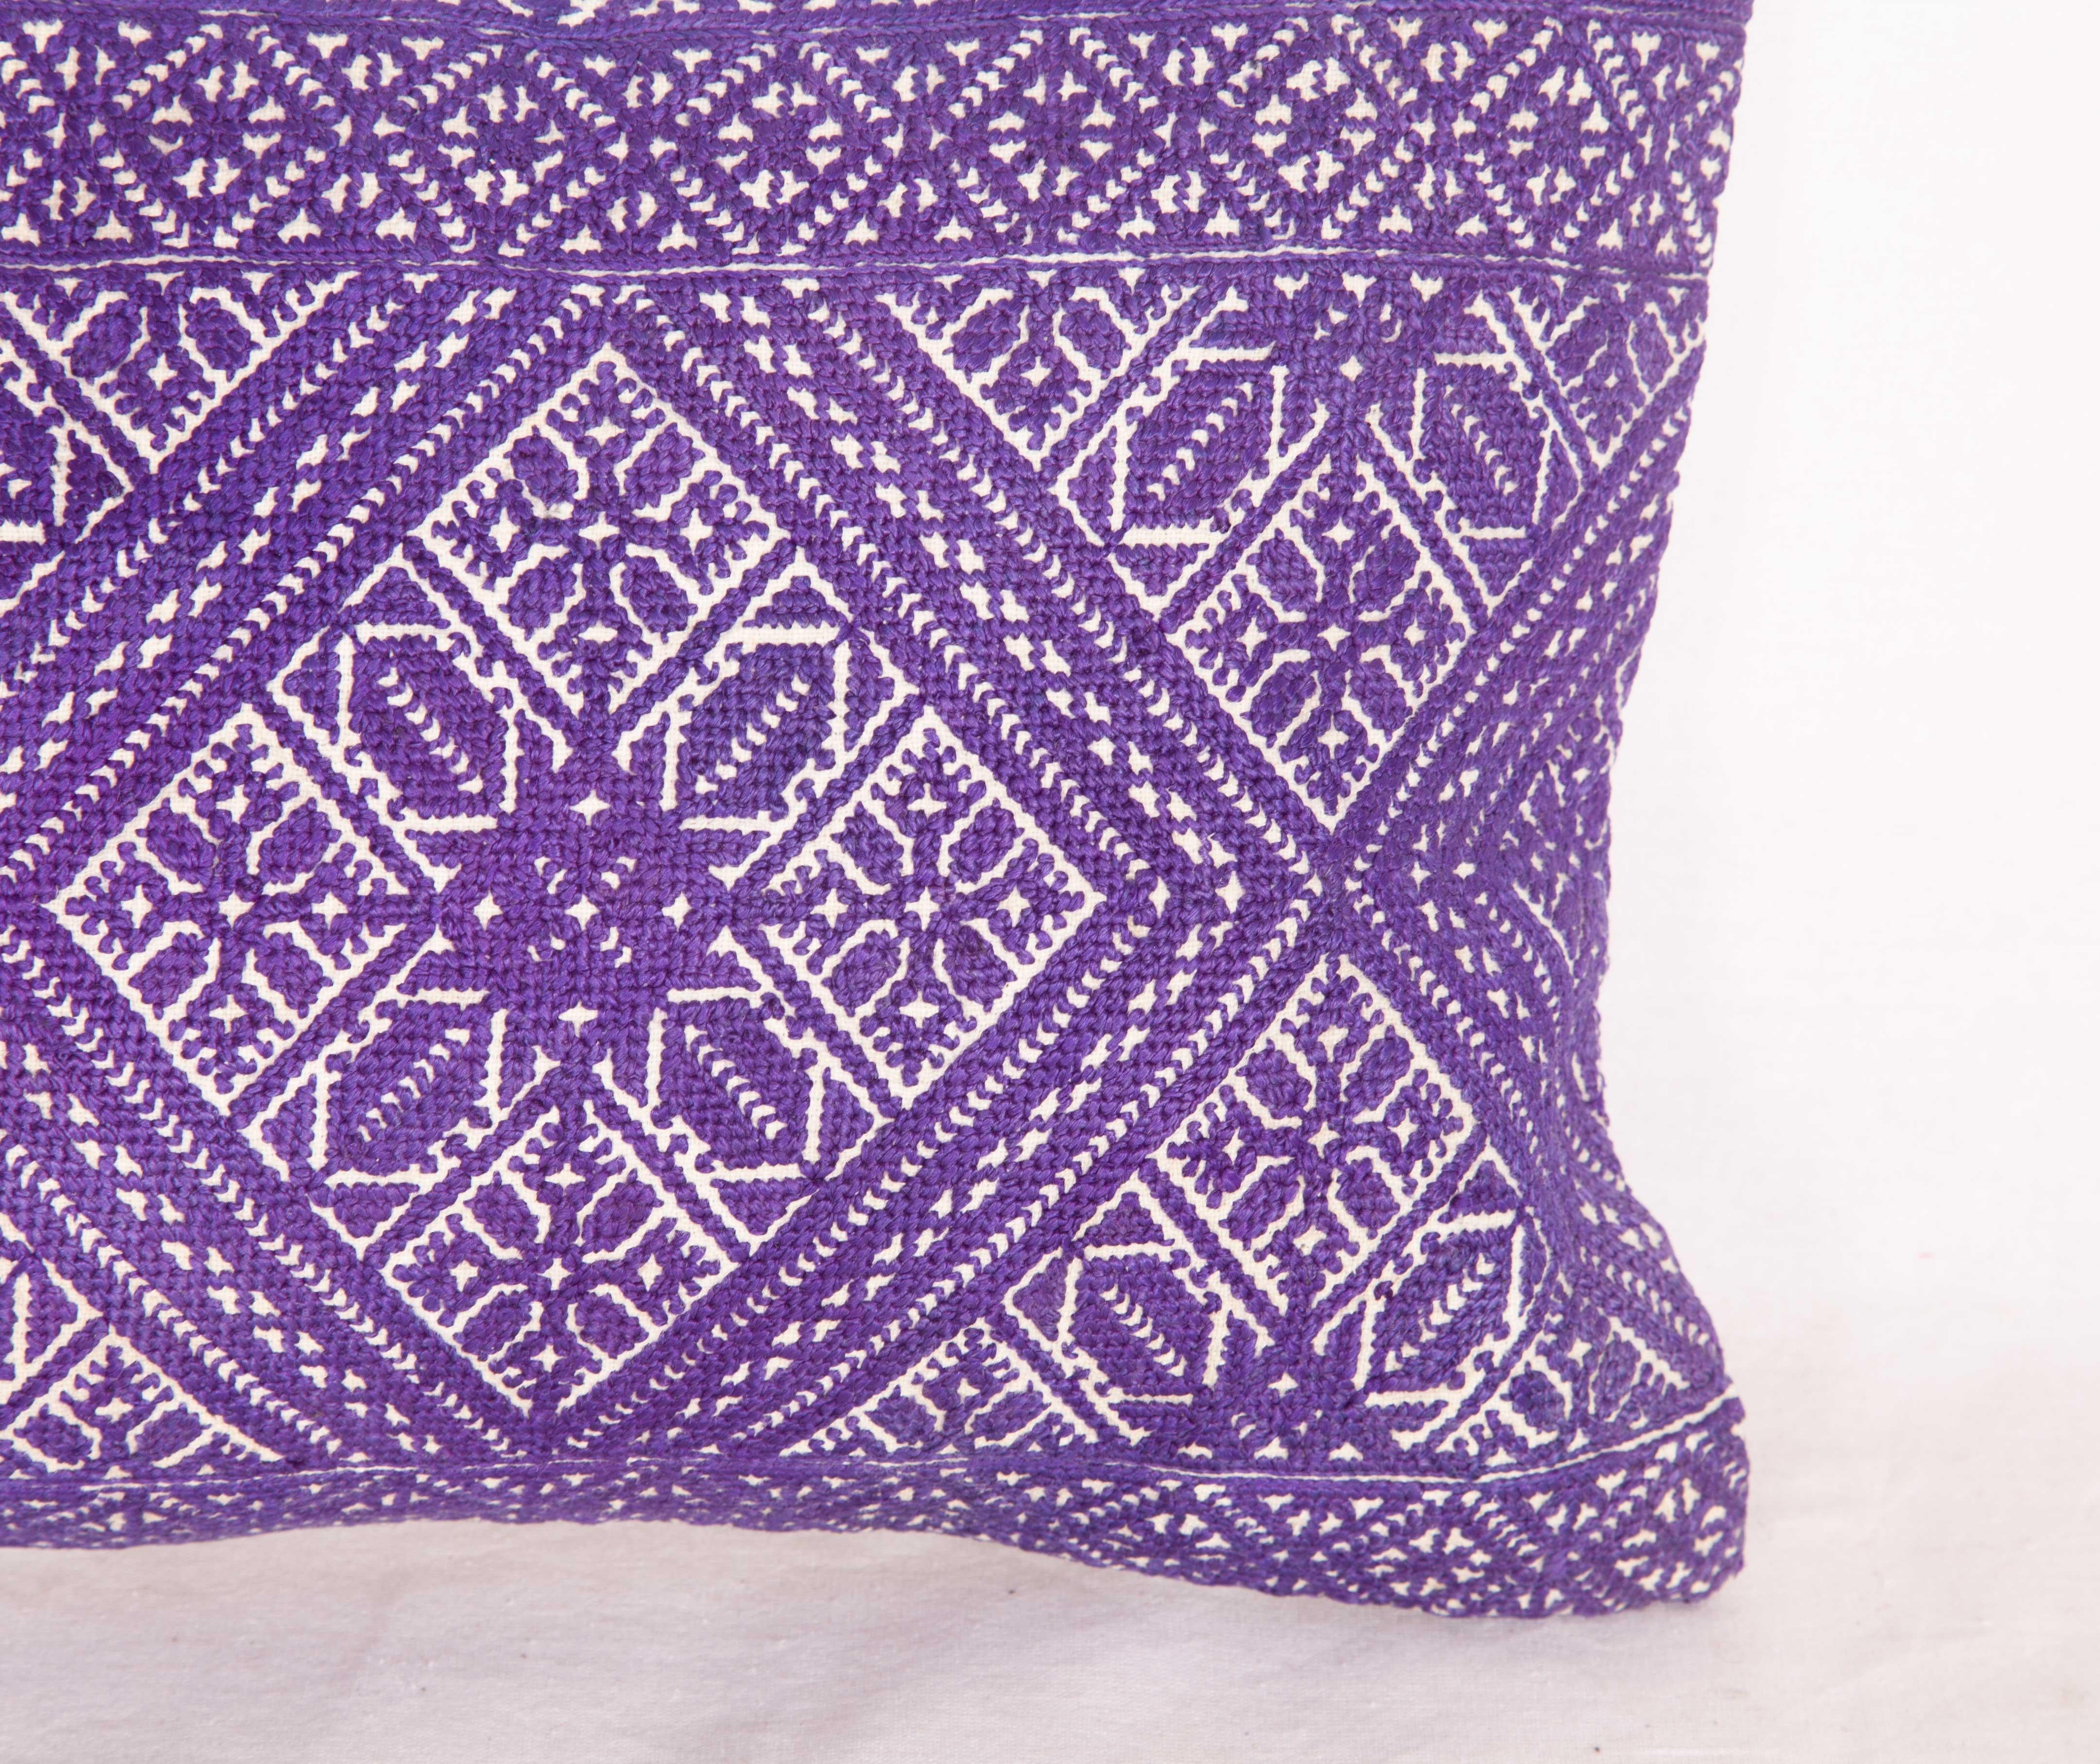 Embroidered Antique Moroccan Pillow Case Fashioned from a Fez Embroidery, Early 20th Century